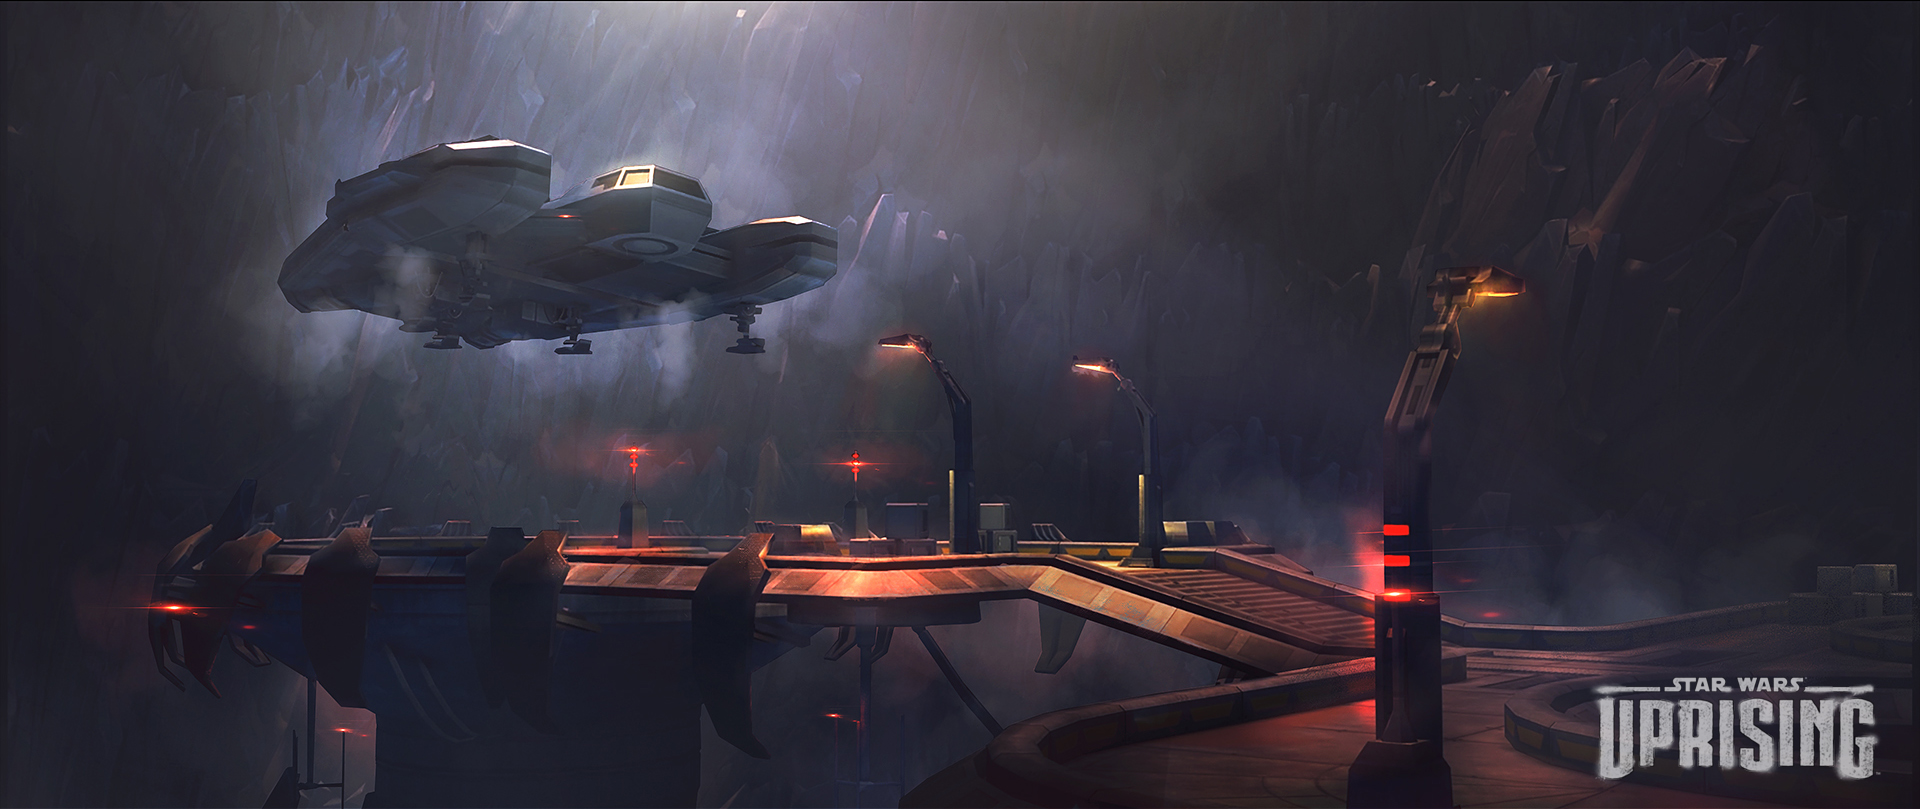 Star Wars: Uprising Will Fill the Gap Between The Force Awakens and Return of the Jedi